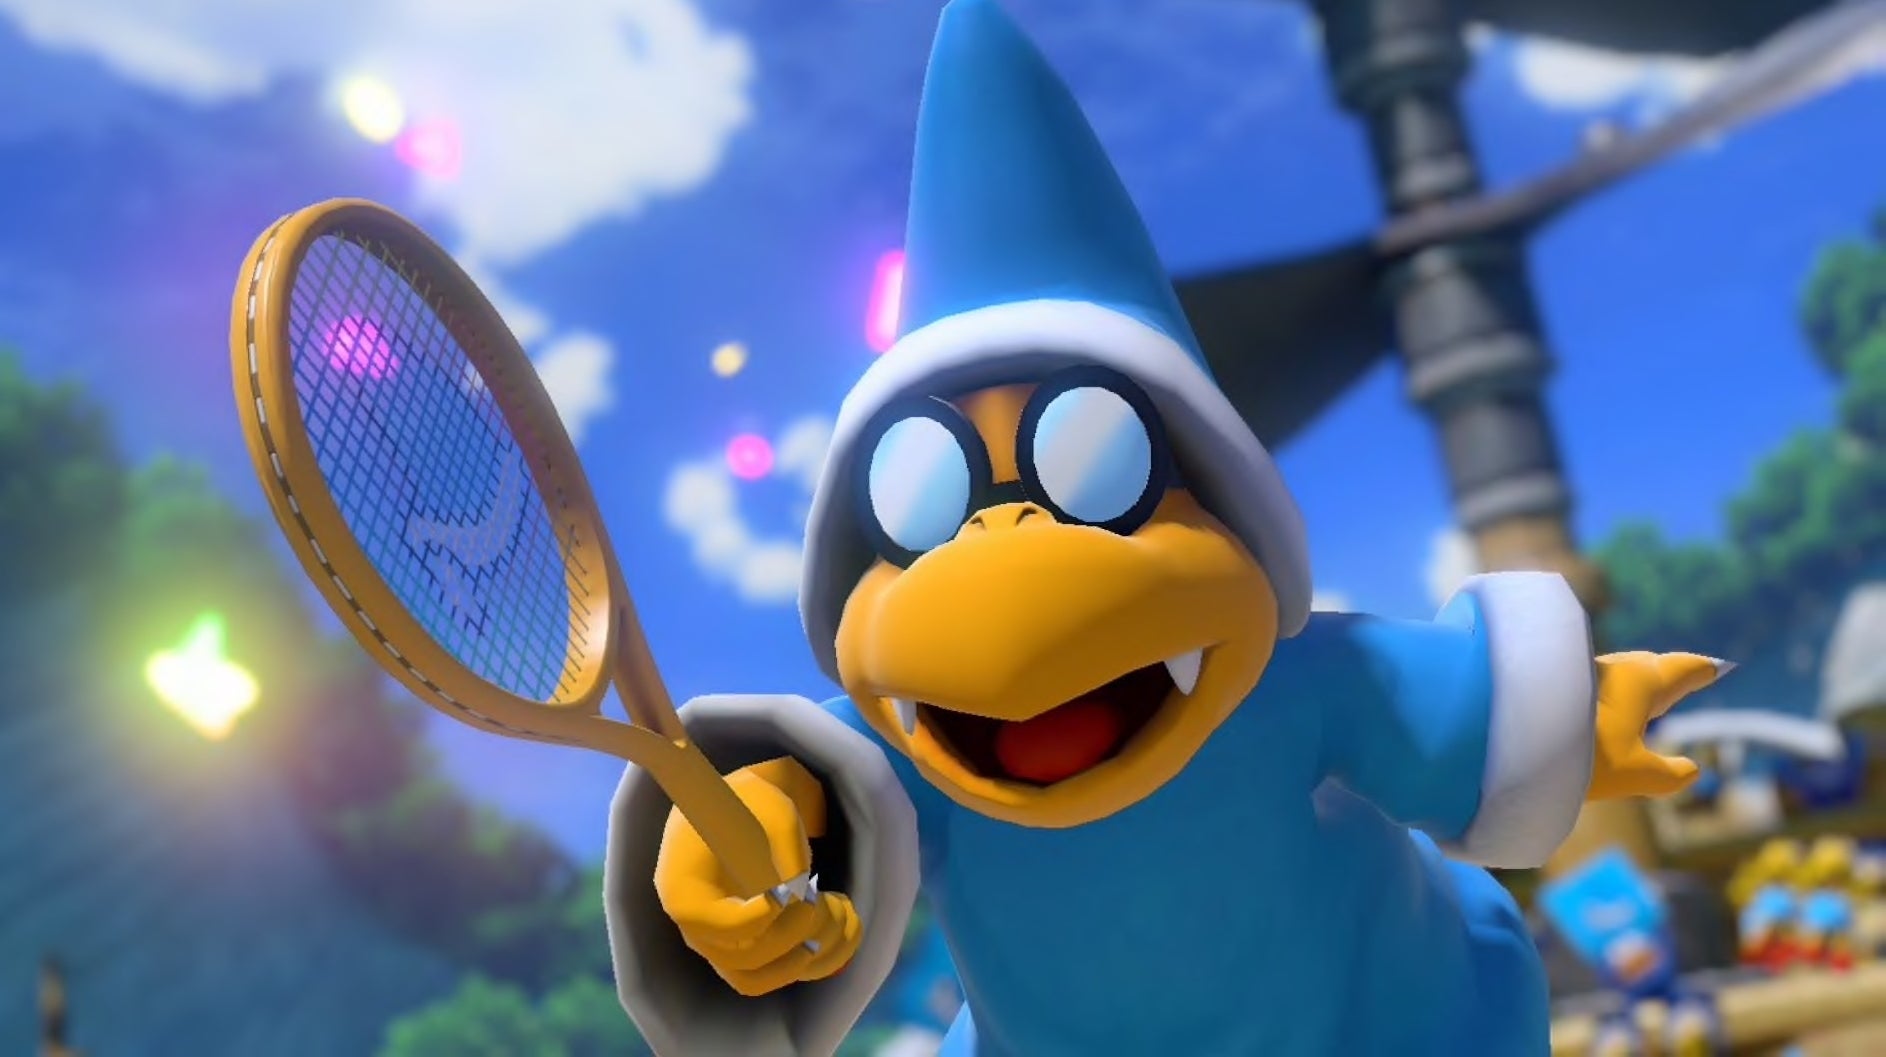 Image for Mario Tennis Aces' big 3.0 update adds new Ring Shot mode, new Yoshi variants